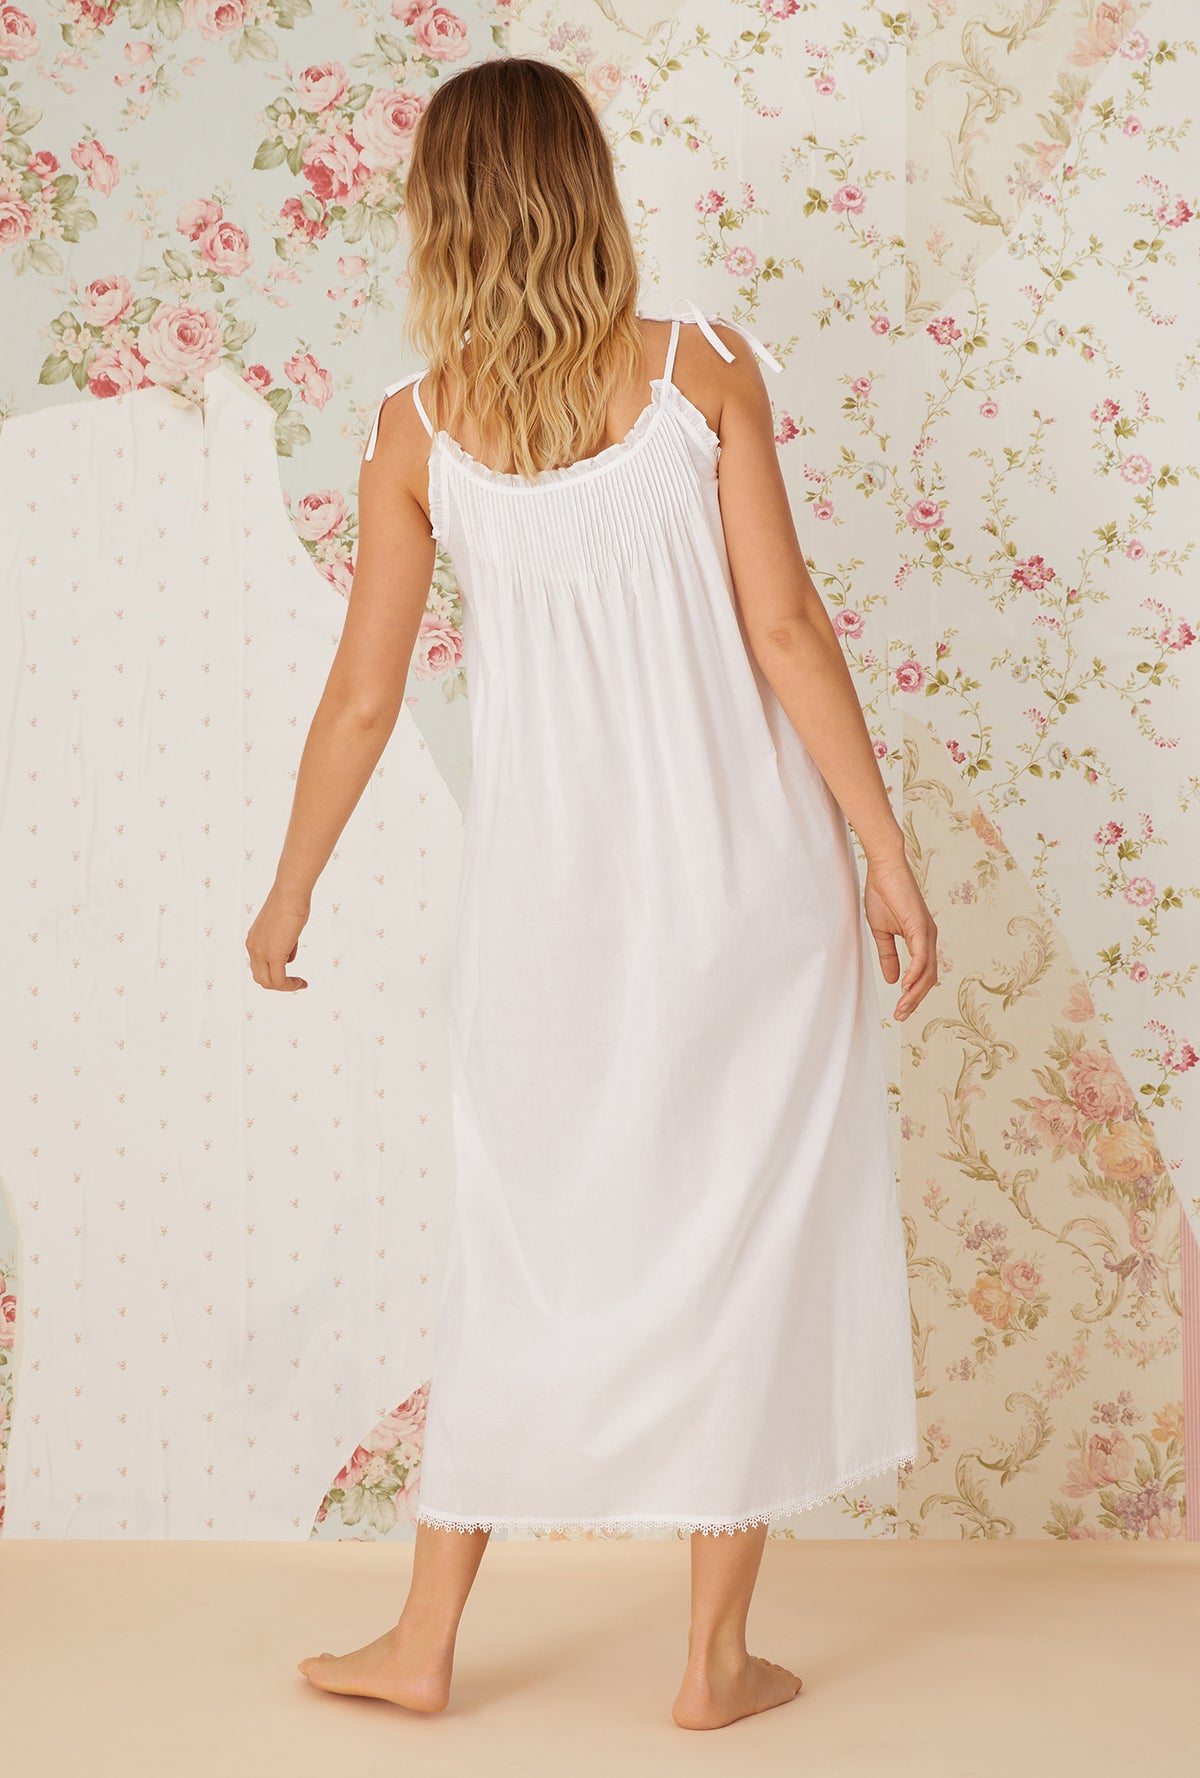 A lady wearing white sleeveless cotton nightgown with the erica.